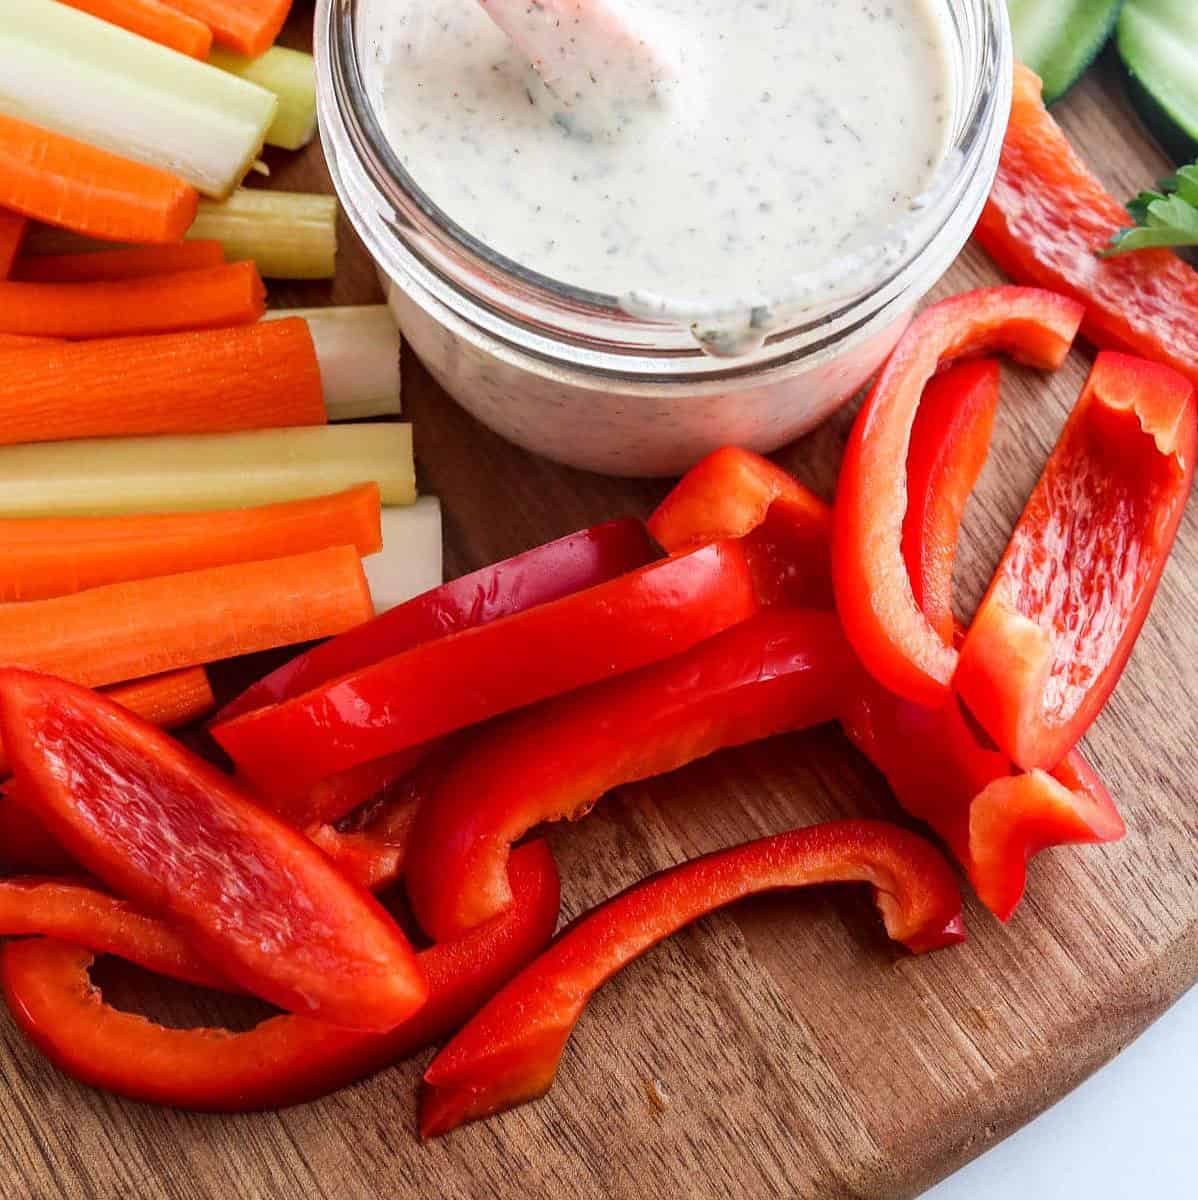  Once you try this vegan ranch dressing, you'll never go back to the store-bought stuff.